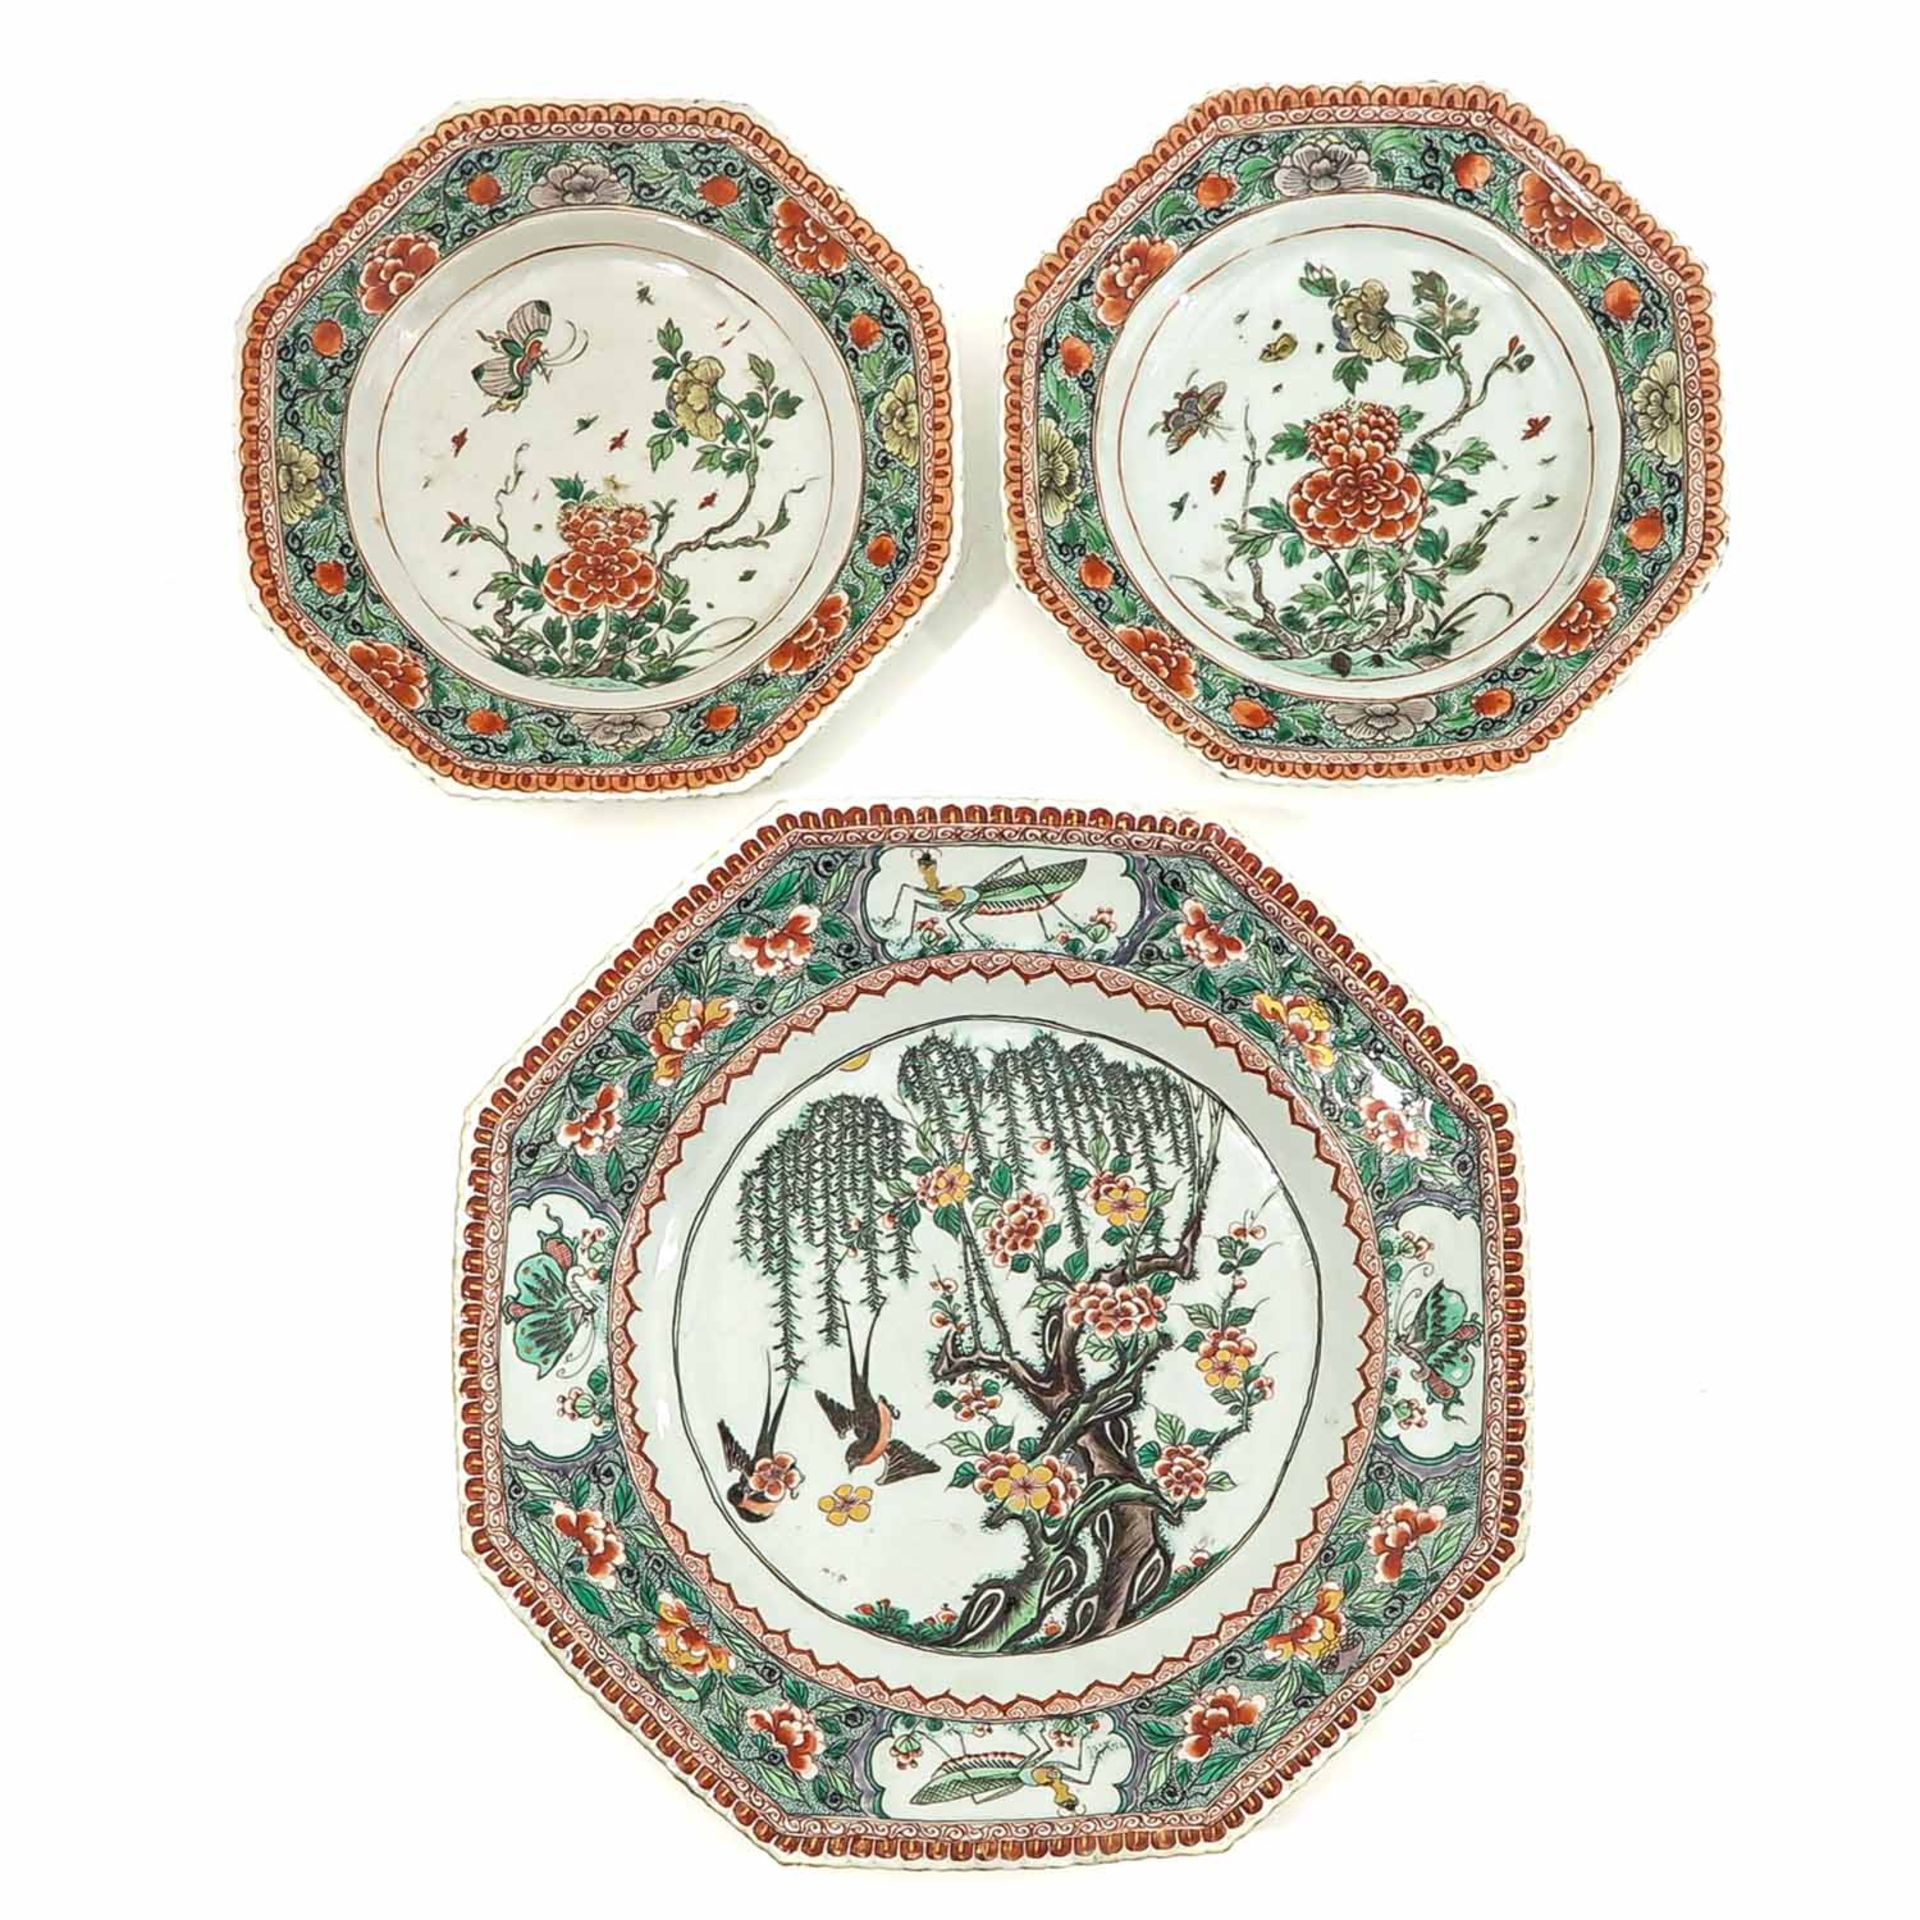 A Collection of 3 Plates